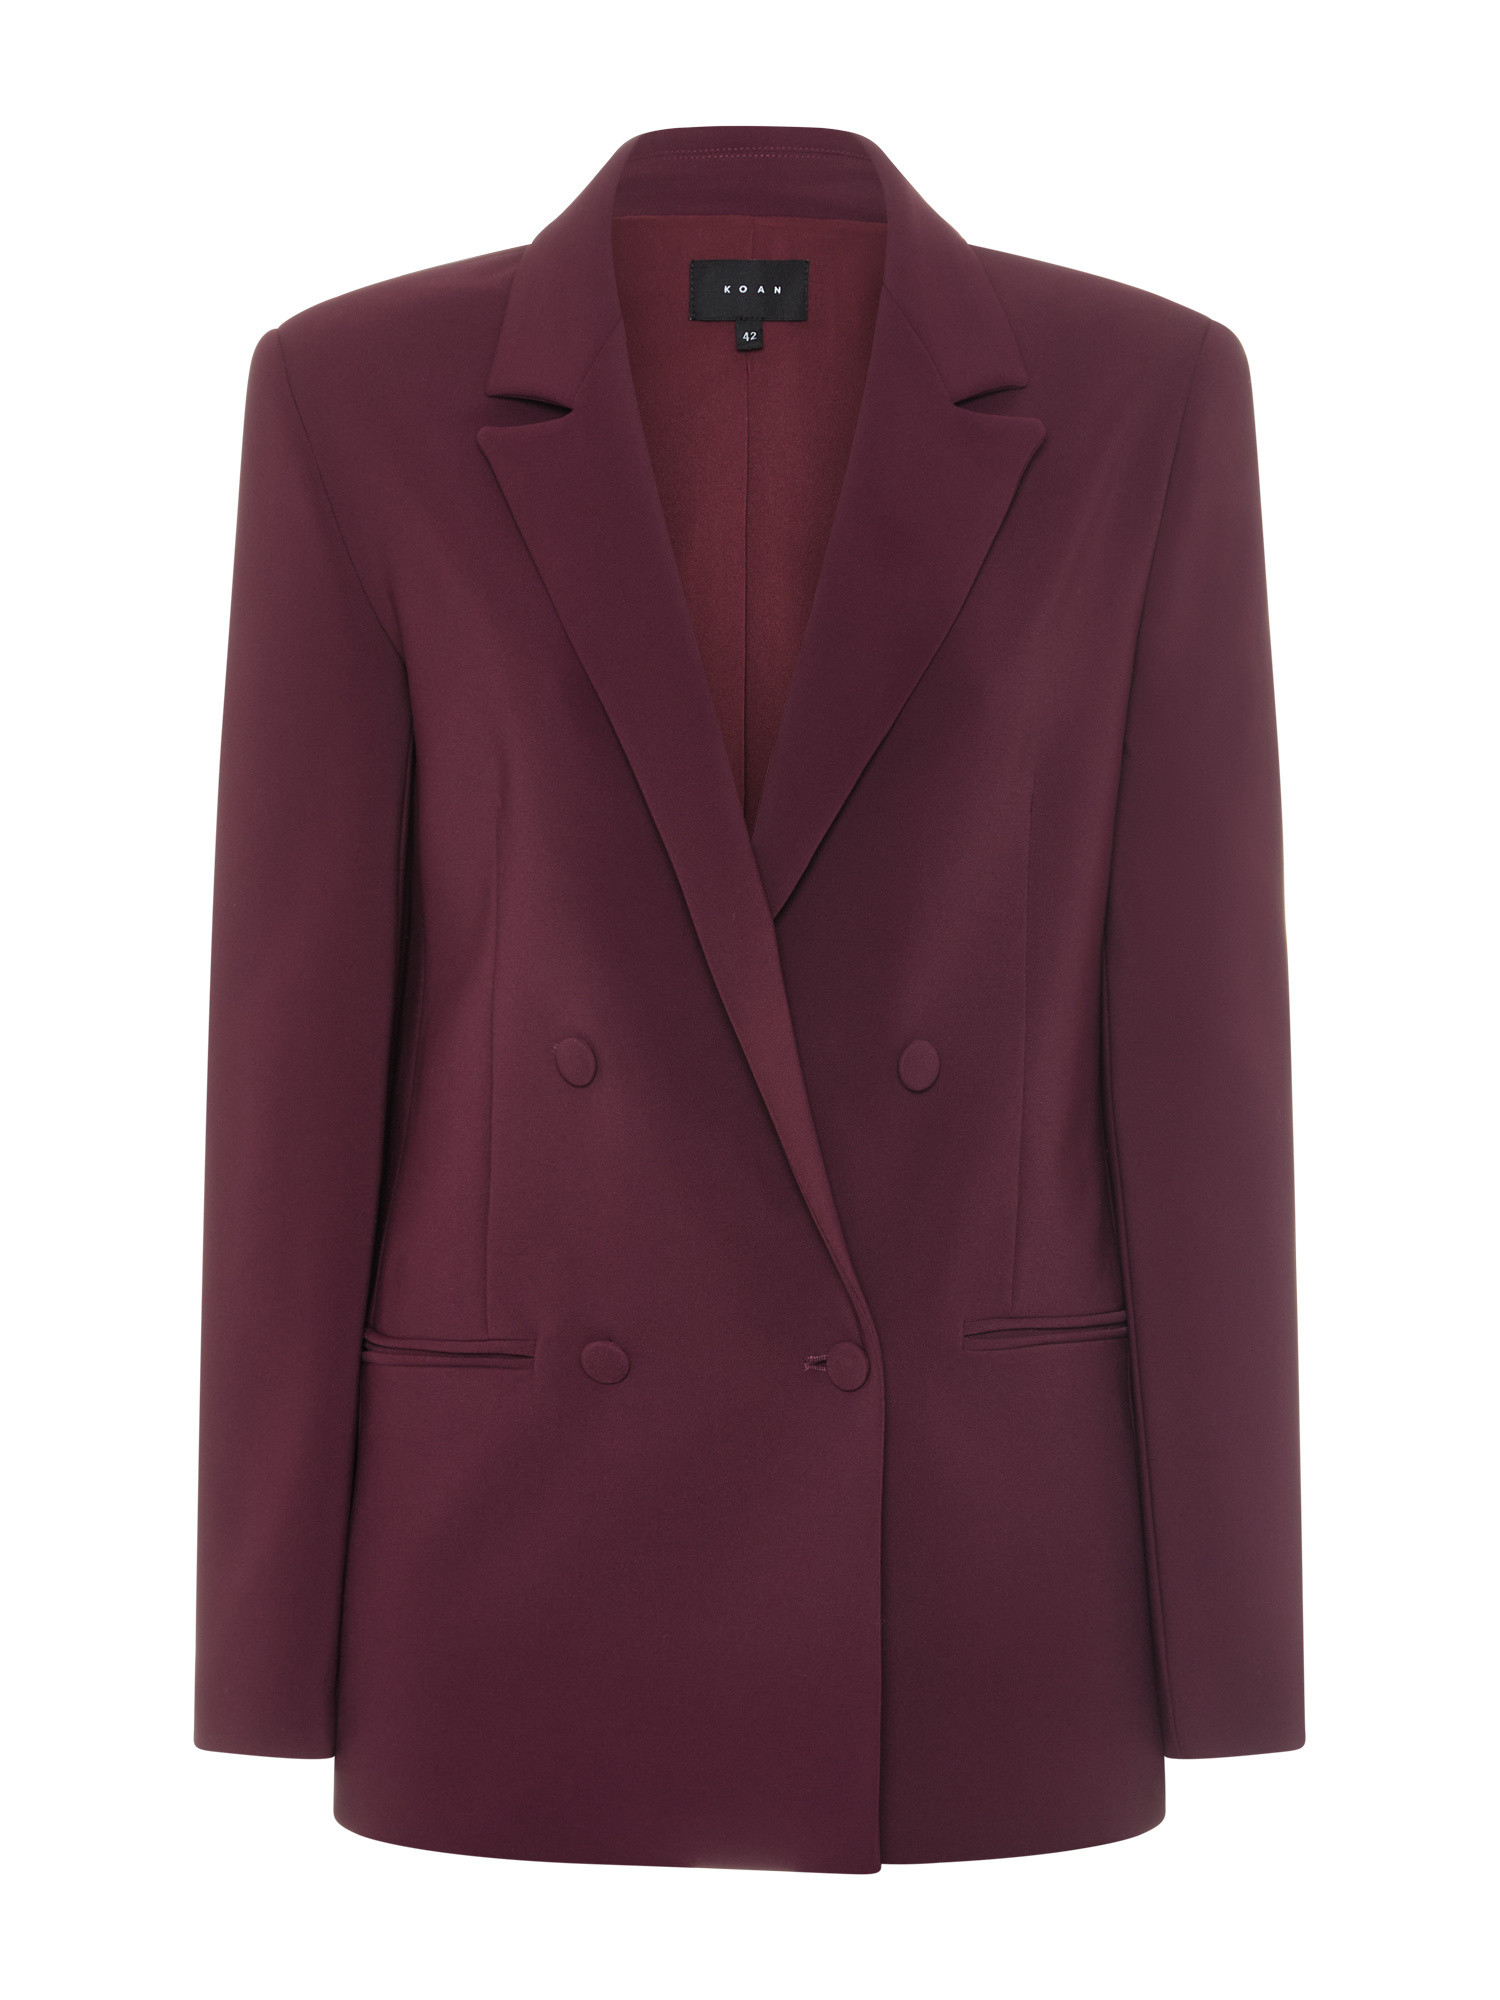 Koan - Double-breasted jacket, Red Bordeaux, large image number 0